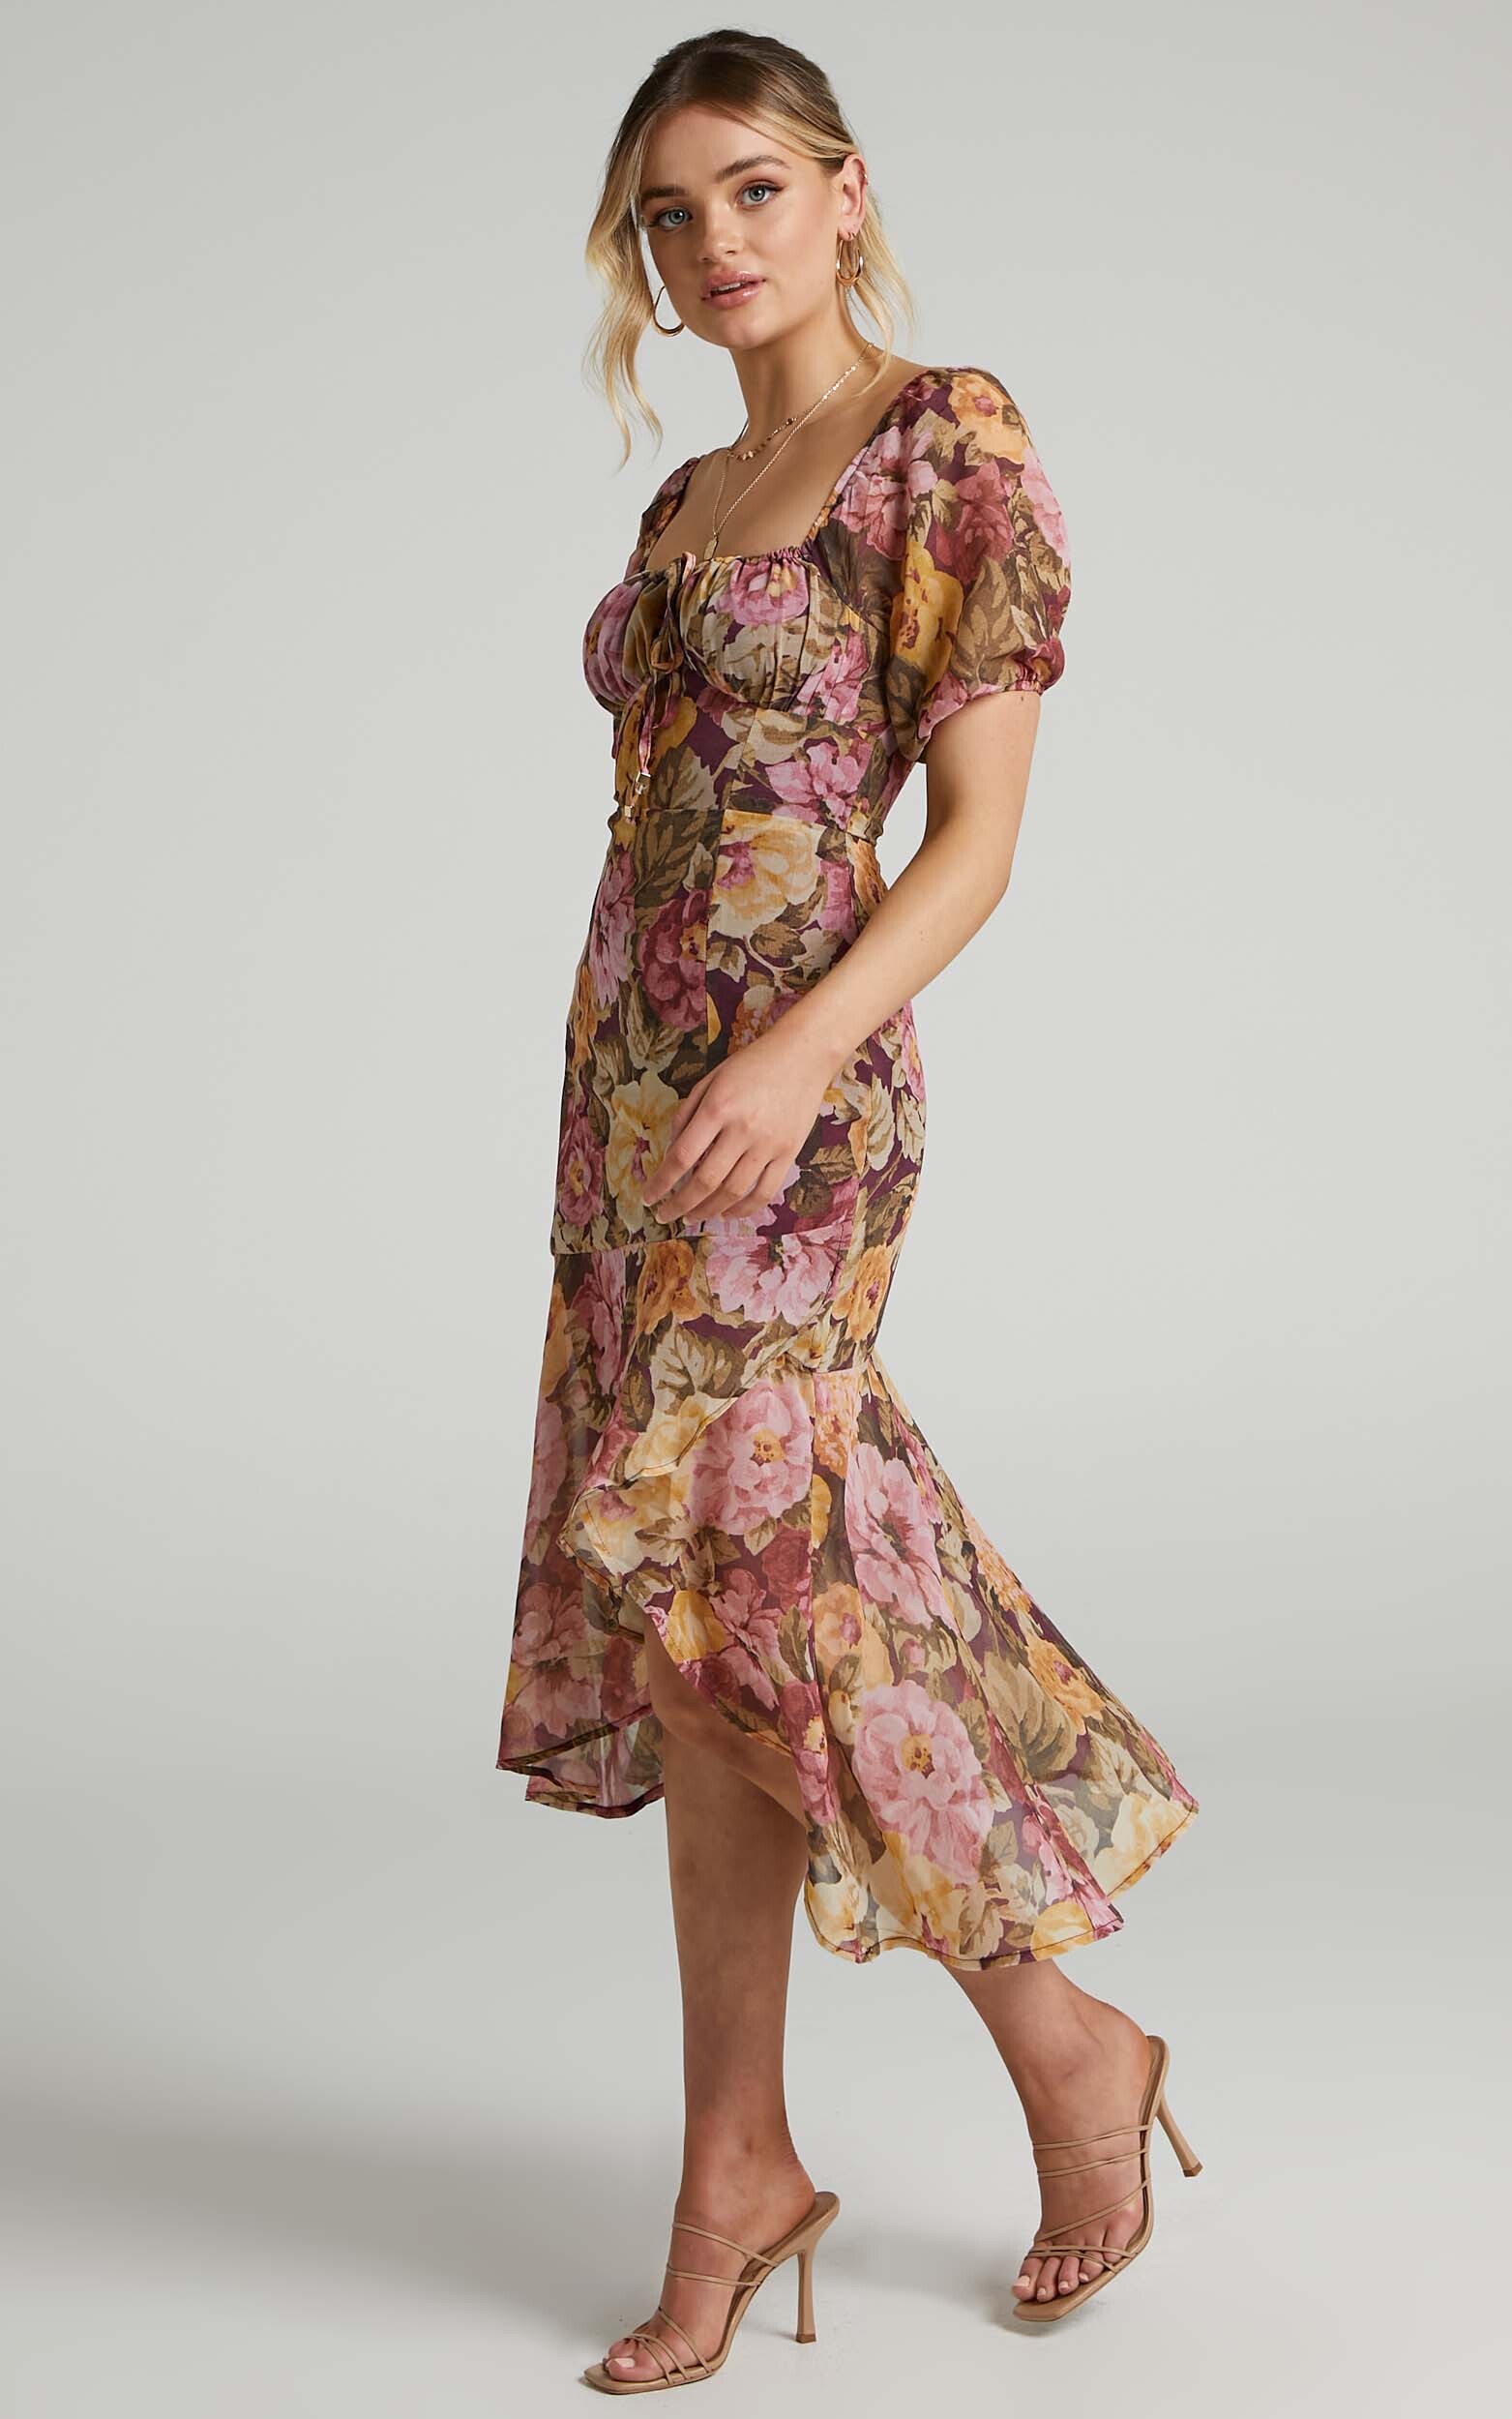 Jasalina Puff Sleeve Midi Dress in Classic Floral - 06, PNK1, hi-res image number null